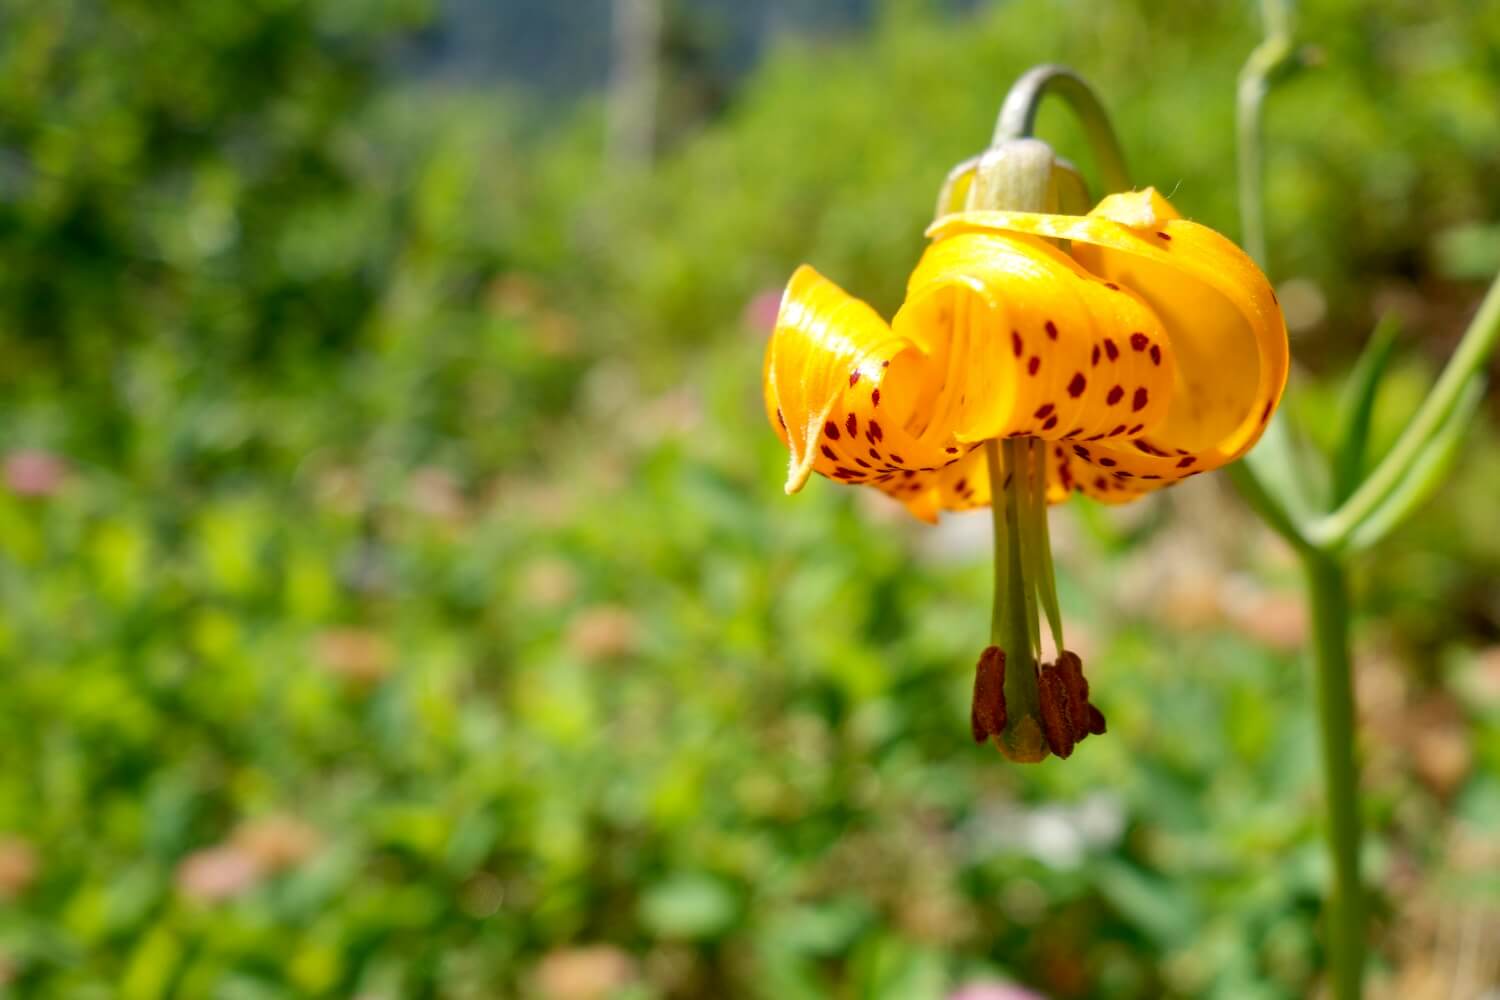 A delicate yellow flower with red dots begins to open up while facing downward toward the meadow floor.